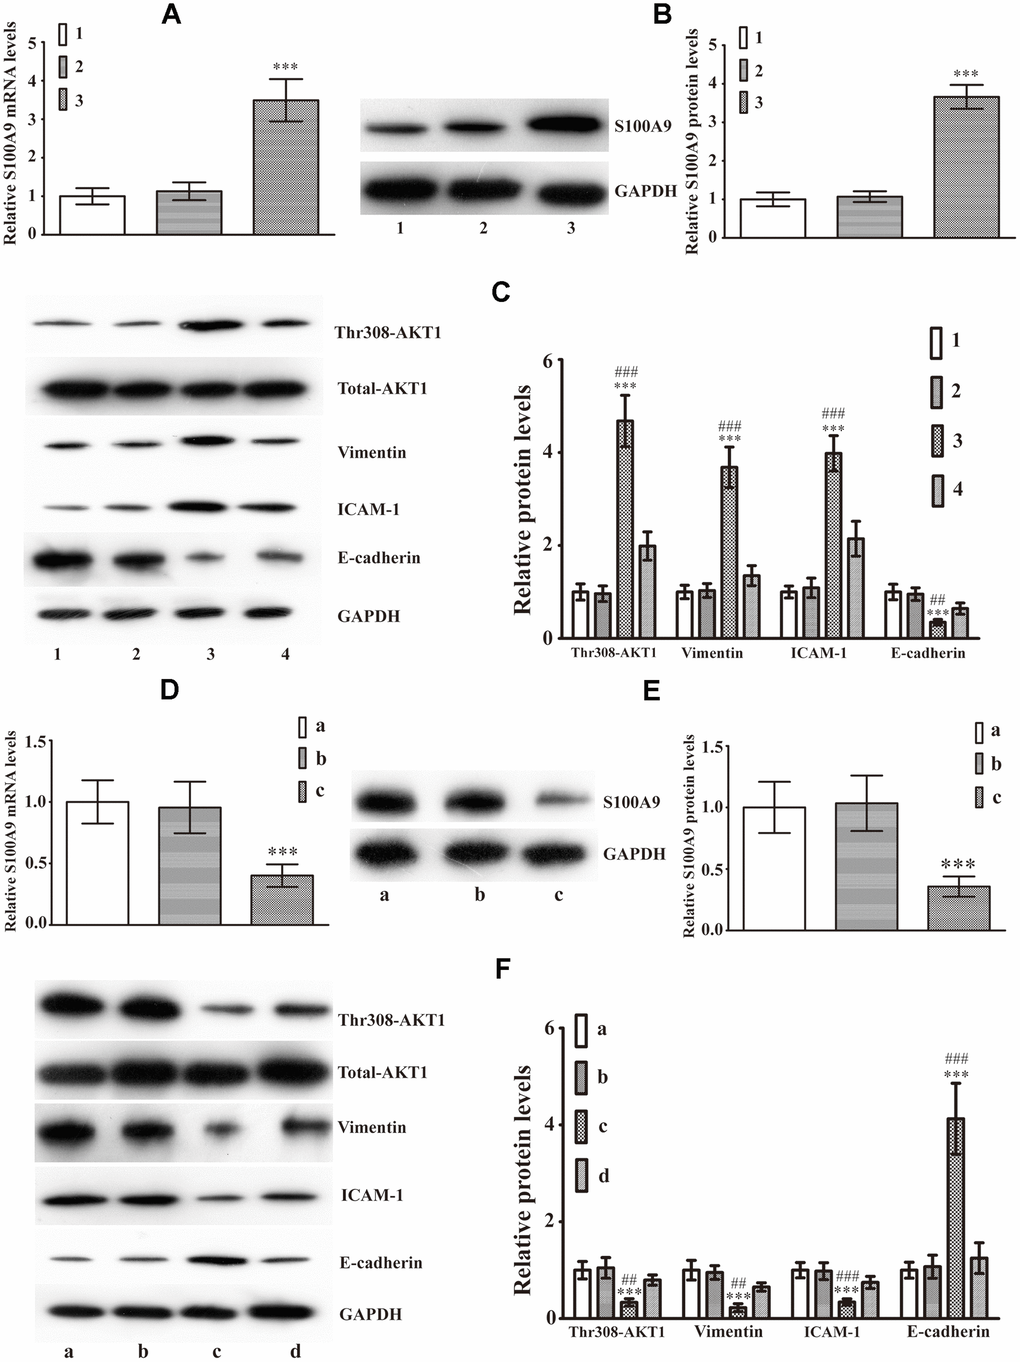 Intracellular S100A9 regulates phosphorylation of AKT1Thr308 and induces EMT in PA. (A) The mRNA levels of S100A9 in control group (group 1), NC1 group (group 2), LV-S100A9 group (group 3) were detected by Real-Time PCR(n=9, P***B) Western blot was used to observe S100A9 protein levels in groups 1, 2, and 3(n=5, P***C) The expression of phospho-AKT1Thr308, Vimentin, ICAM-1 and E-cadherin was explored using western blot analysis in groups 1, 2, 3 and a LV-S100A9 + addition of A-674563 group (group 4)(n=5, P***vs. group 1. P##P###vs. group 4). (D, E) Real-time PCR and western blot analysis were used to investigate S100A9 mRNA and protein expression in the control group (group a), NC2 group (group b) and S100A9-shRNA-LV group (group c), respectively(n=5, P***F) Western blot demonstrated that downregulation of S100A9 reduced phospho-AKT1Thr308, Vimentin, ICAM-1, coupled with increase in E-cadherin. The S100A9-shRNA-LV + SC79(AKT1 agonist) group (group d) displayed that the reduced phospho-AKT1Thr308, Vimentin, ICAM-1 and elevated E-cadherin were reversed partially by SC97(n=5. P***